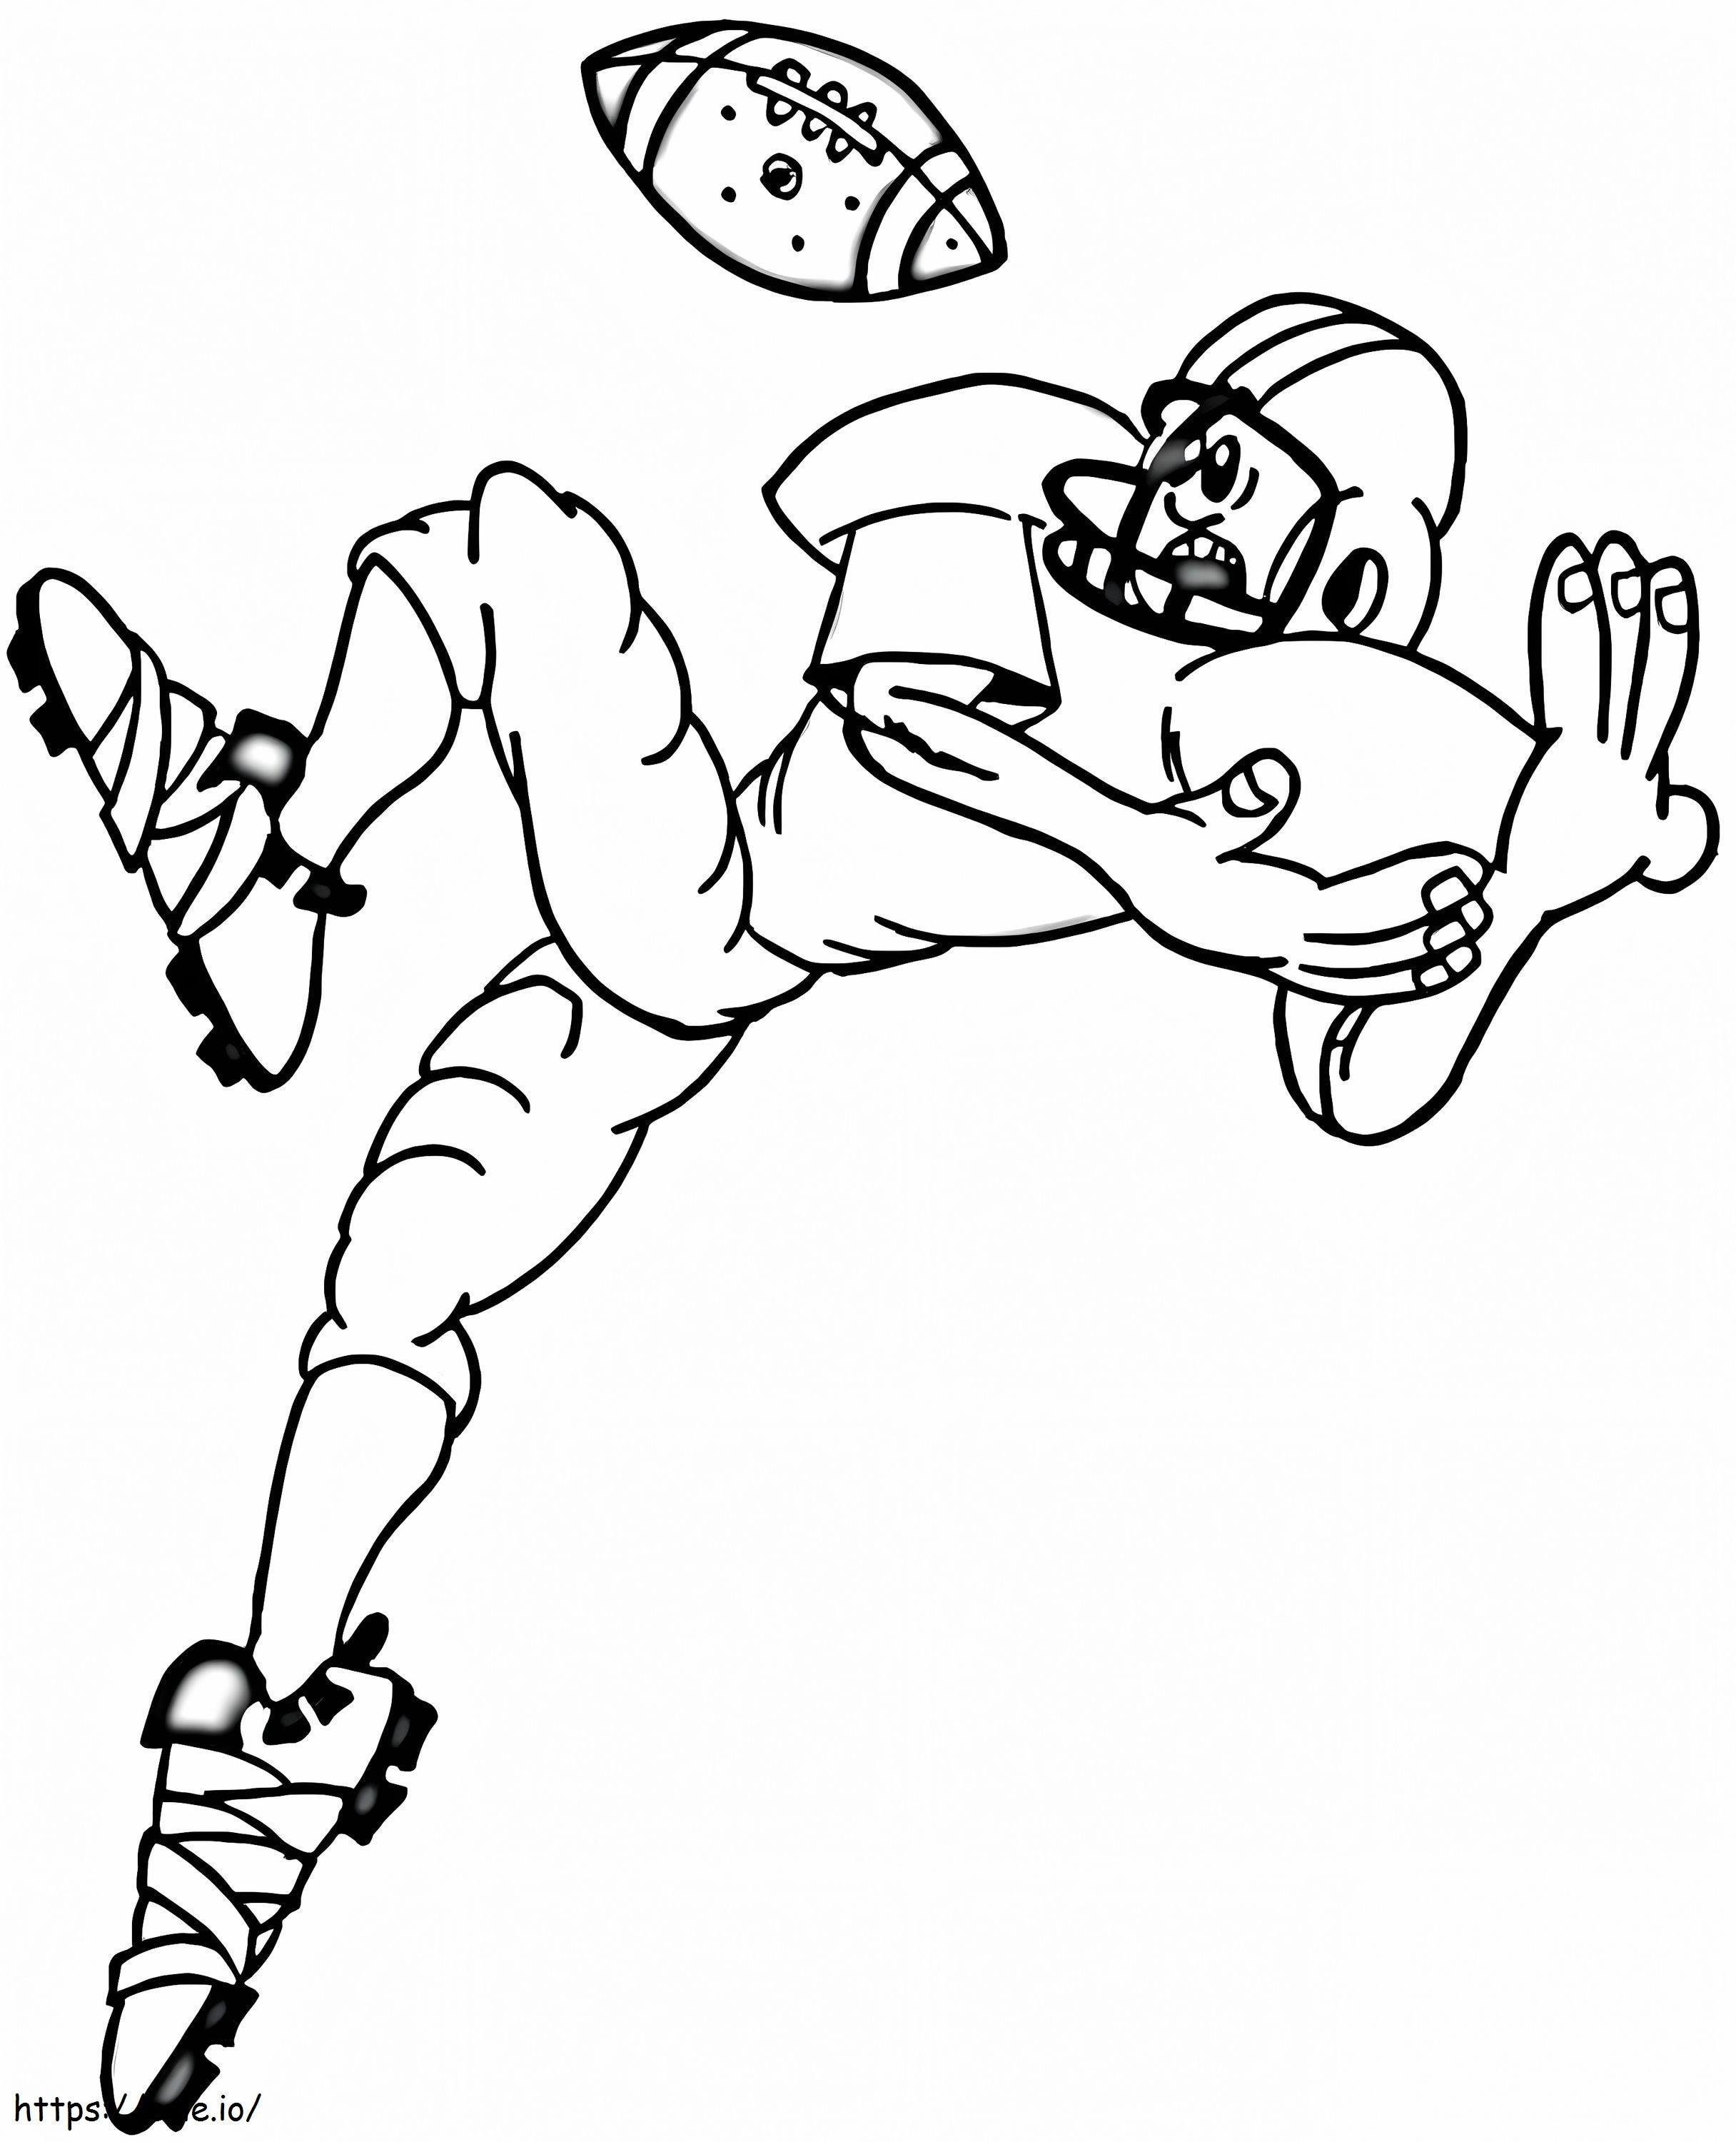 Football Player Falling coloring page